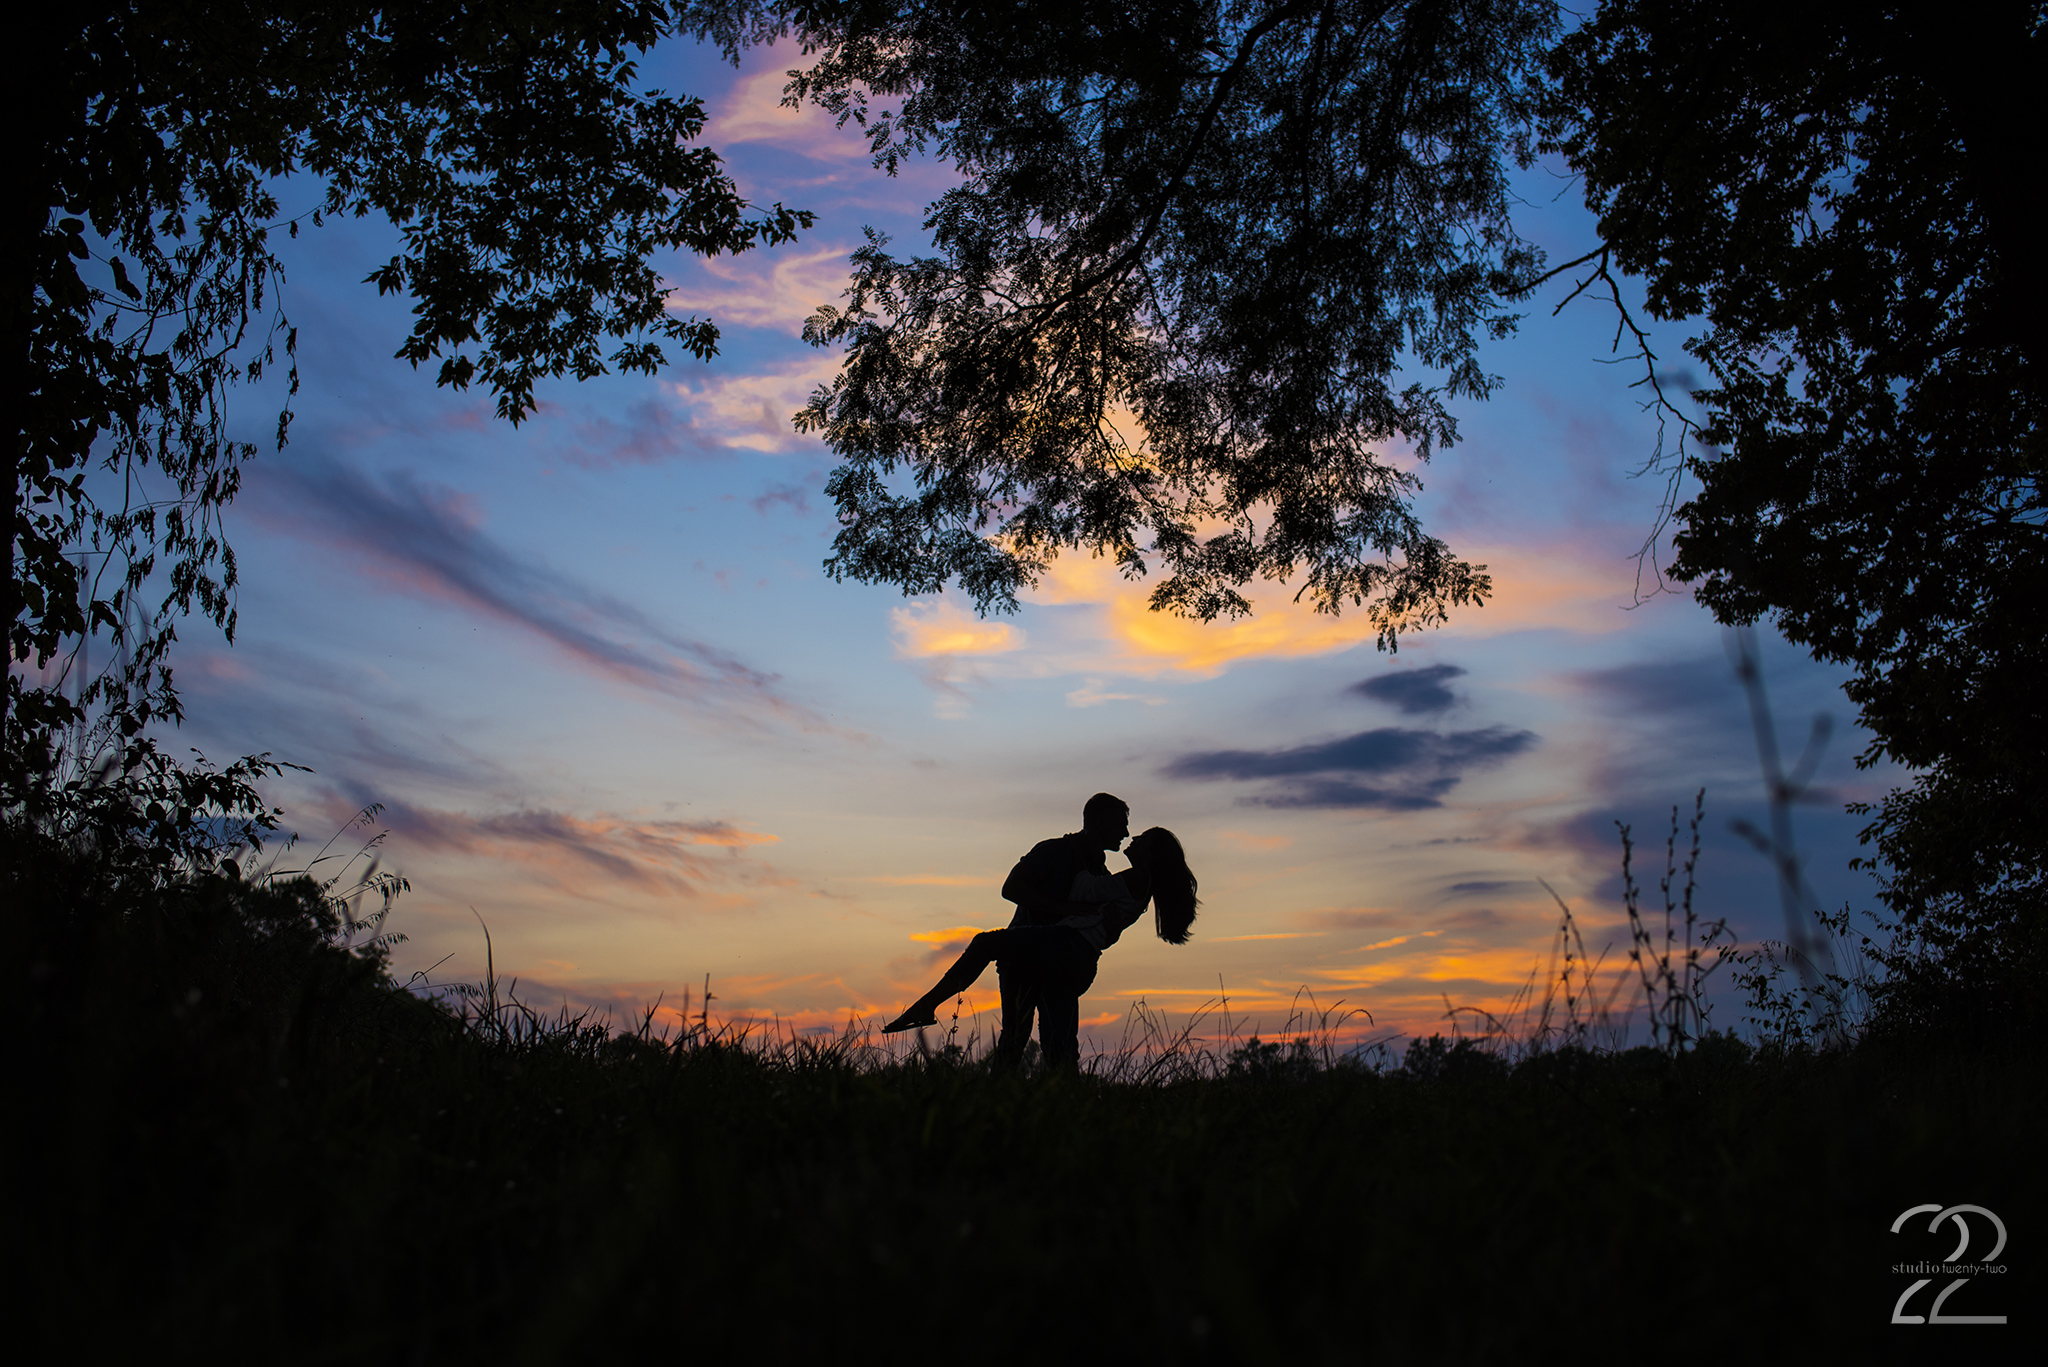 Man dips woman in a field at sunset in Dayton, Ohio by Dayton Wedding Photographer Studio 22 Photography